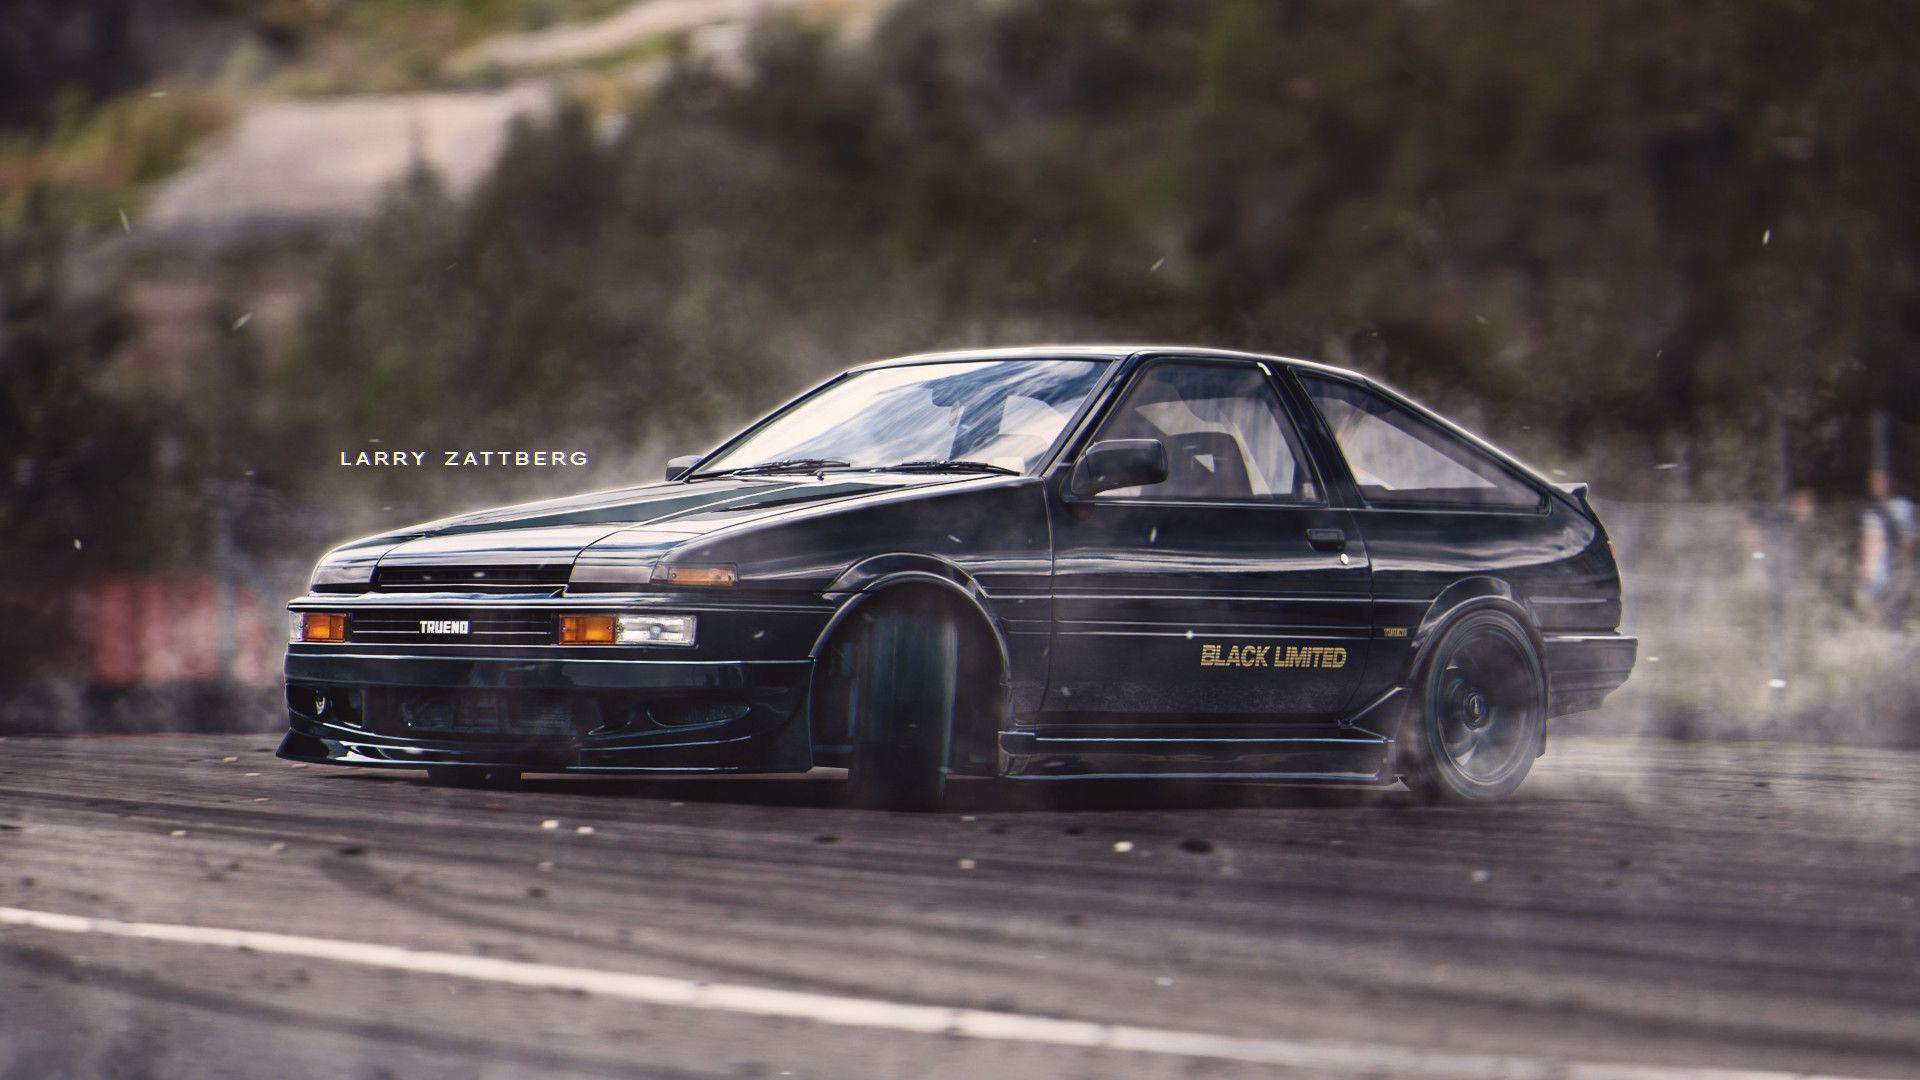 Toyota Ae86 Anime Wallpapers Wallpaper Cave